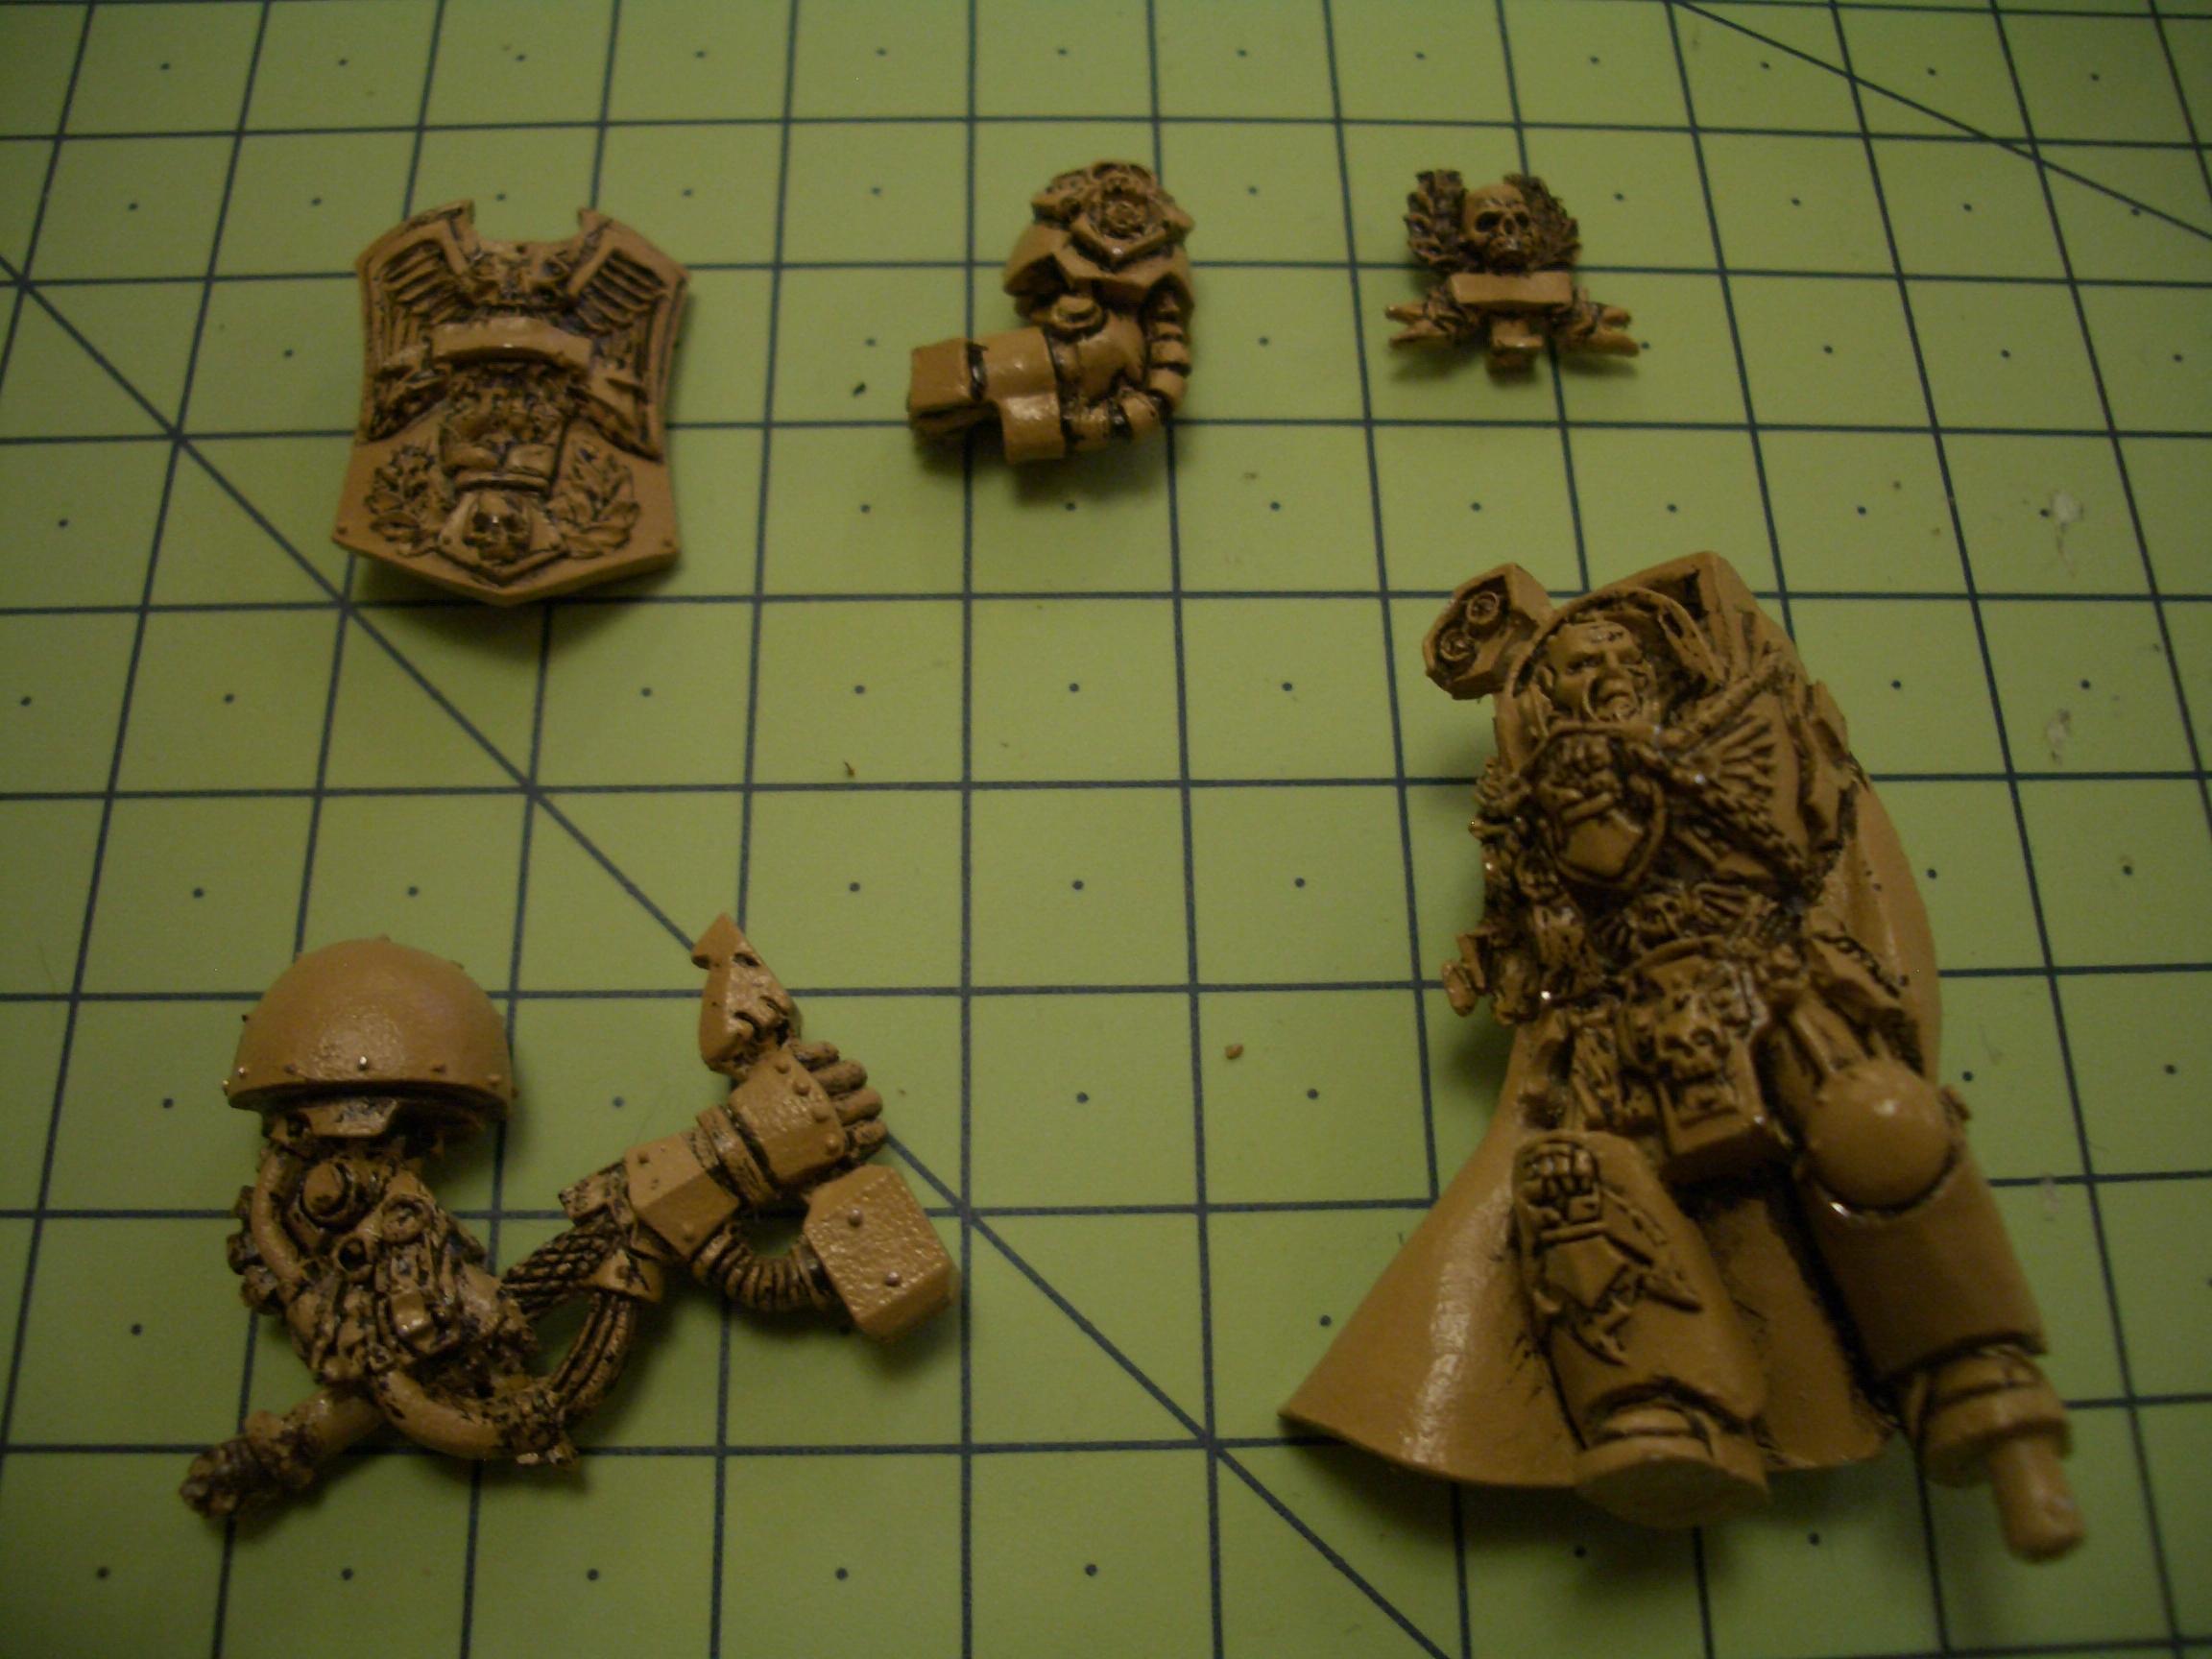 Captain Lysander, Dorn, Imperial Fists, Warhammer 40,000, Work In Progress, Yellow Space Marines